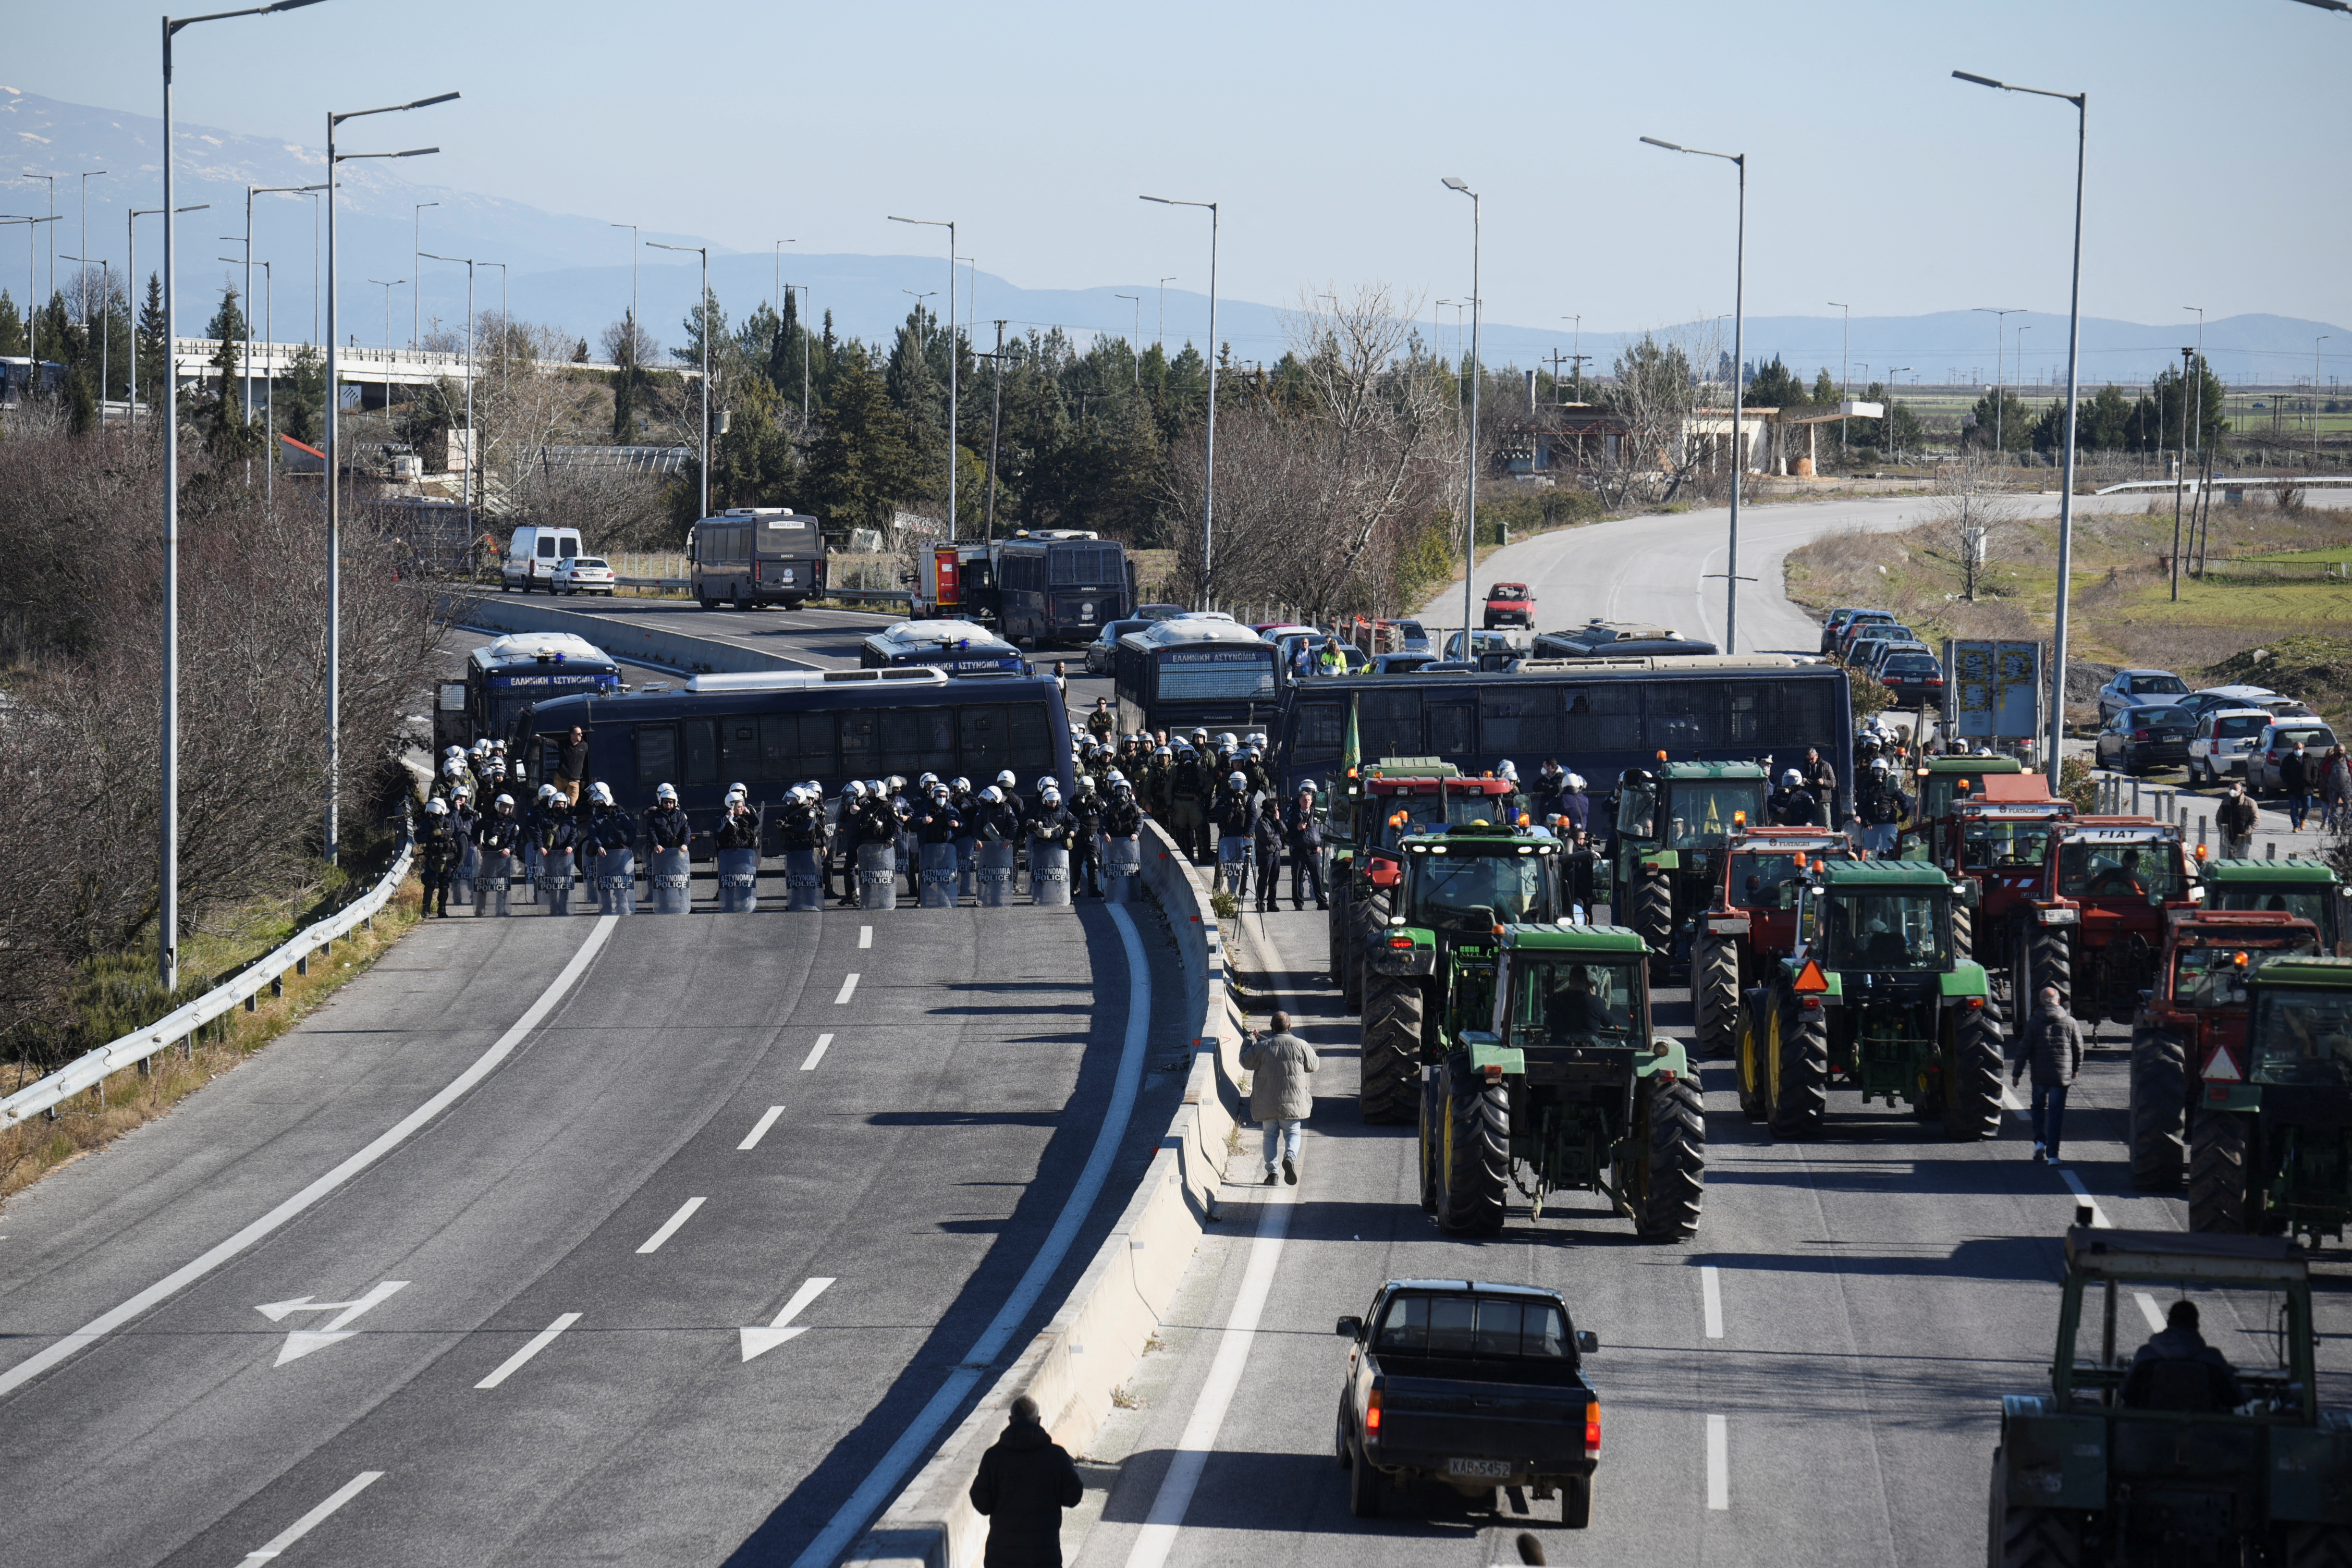 Greek farmers demonstrate against the rising cost of fuel and electricity, near the town of Larissa